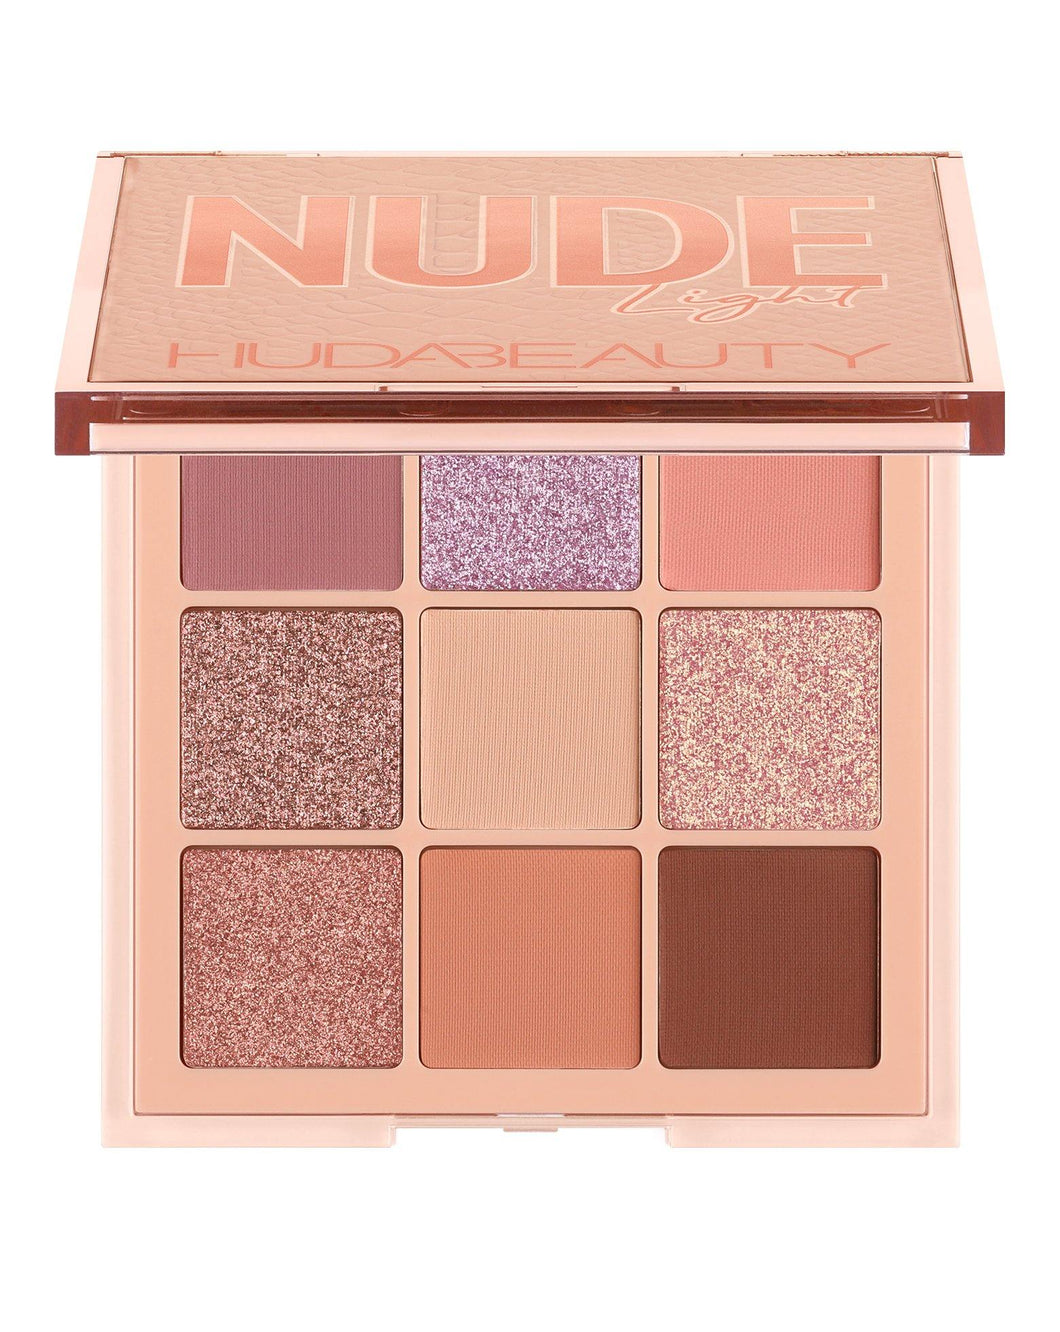 Huda Beauty Nude Obsessions Eyeshadow Palette 9 x 1.1g - Caked South Africa